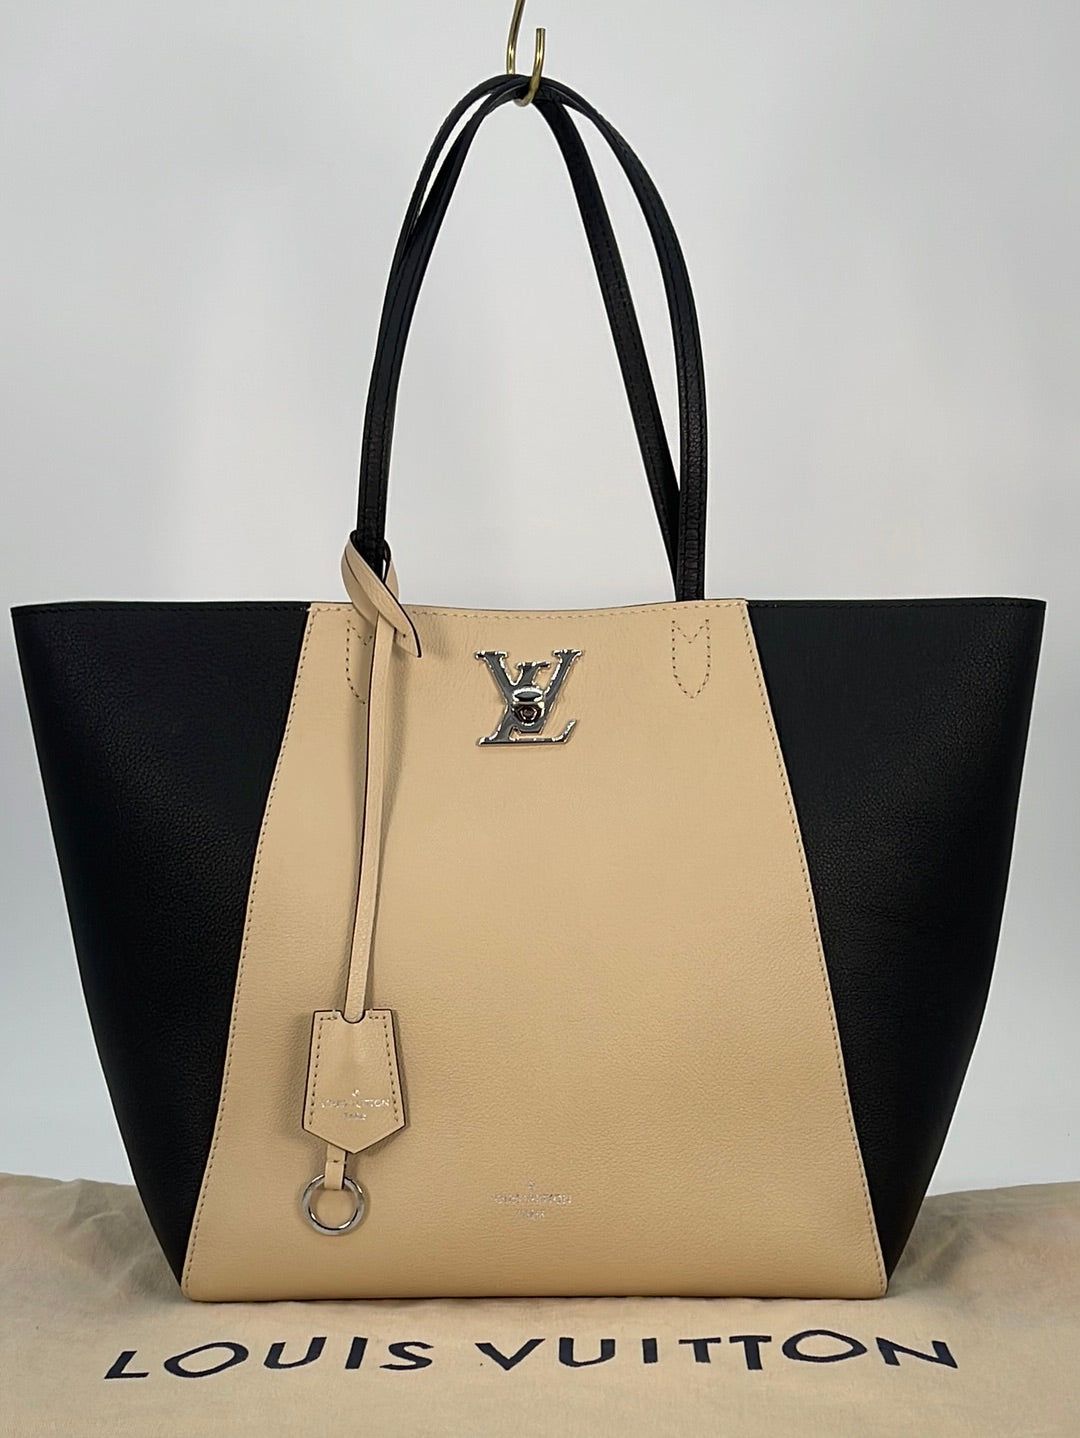 Preloved Louis Vuitton Cream and Black Leather Lockme Cabas Tote